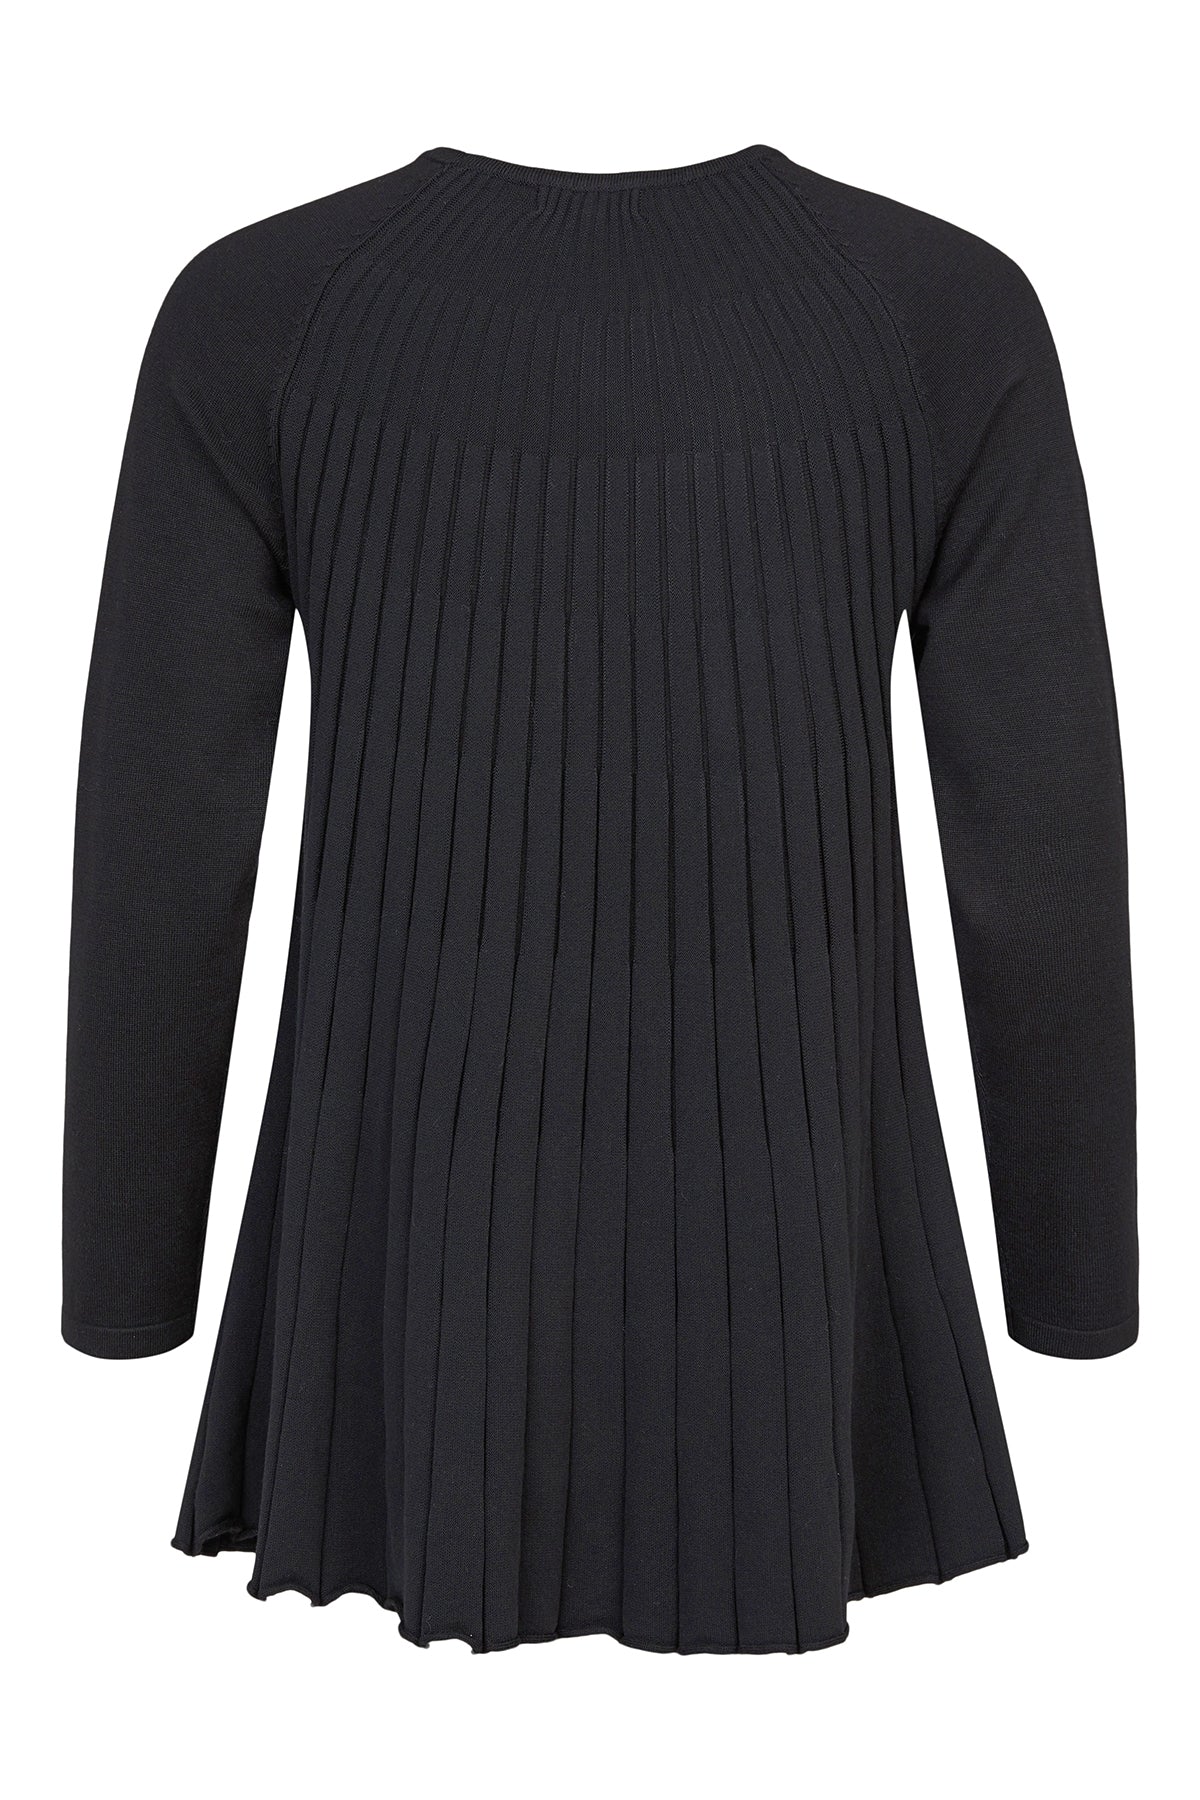 Sunday Black Pleat Front Pullover